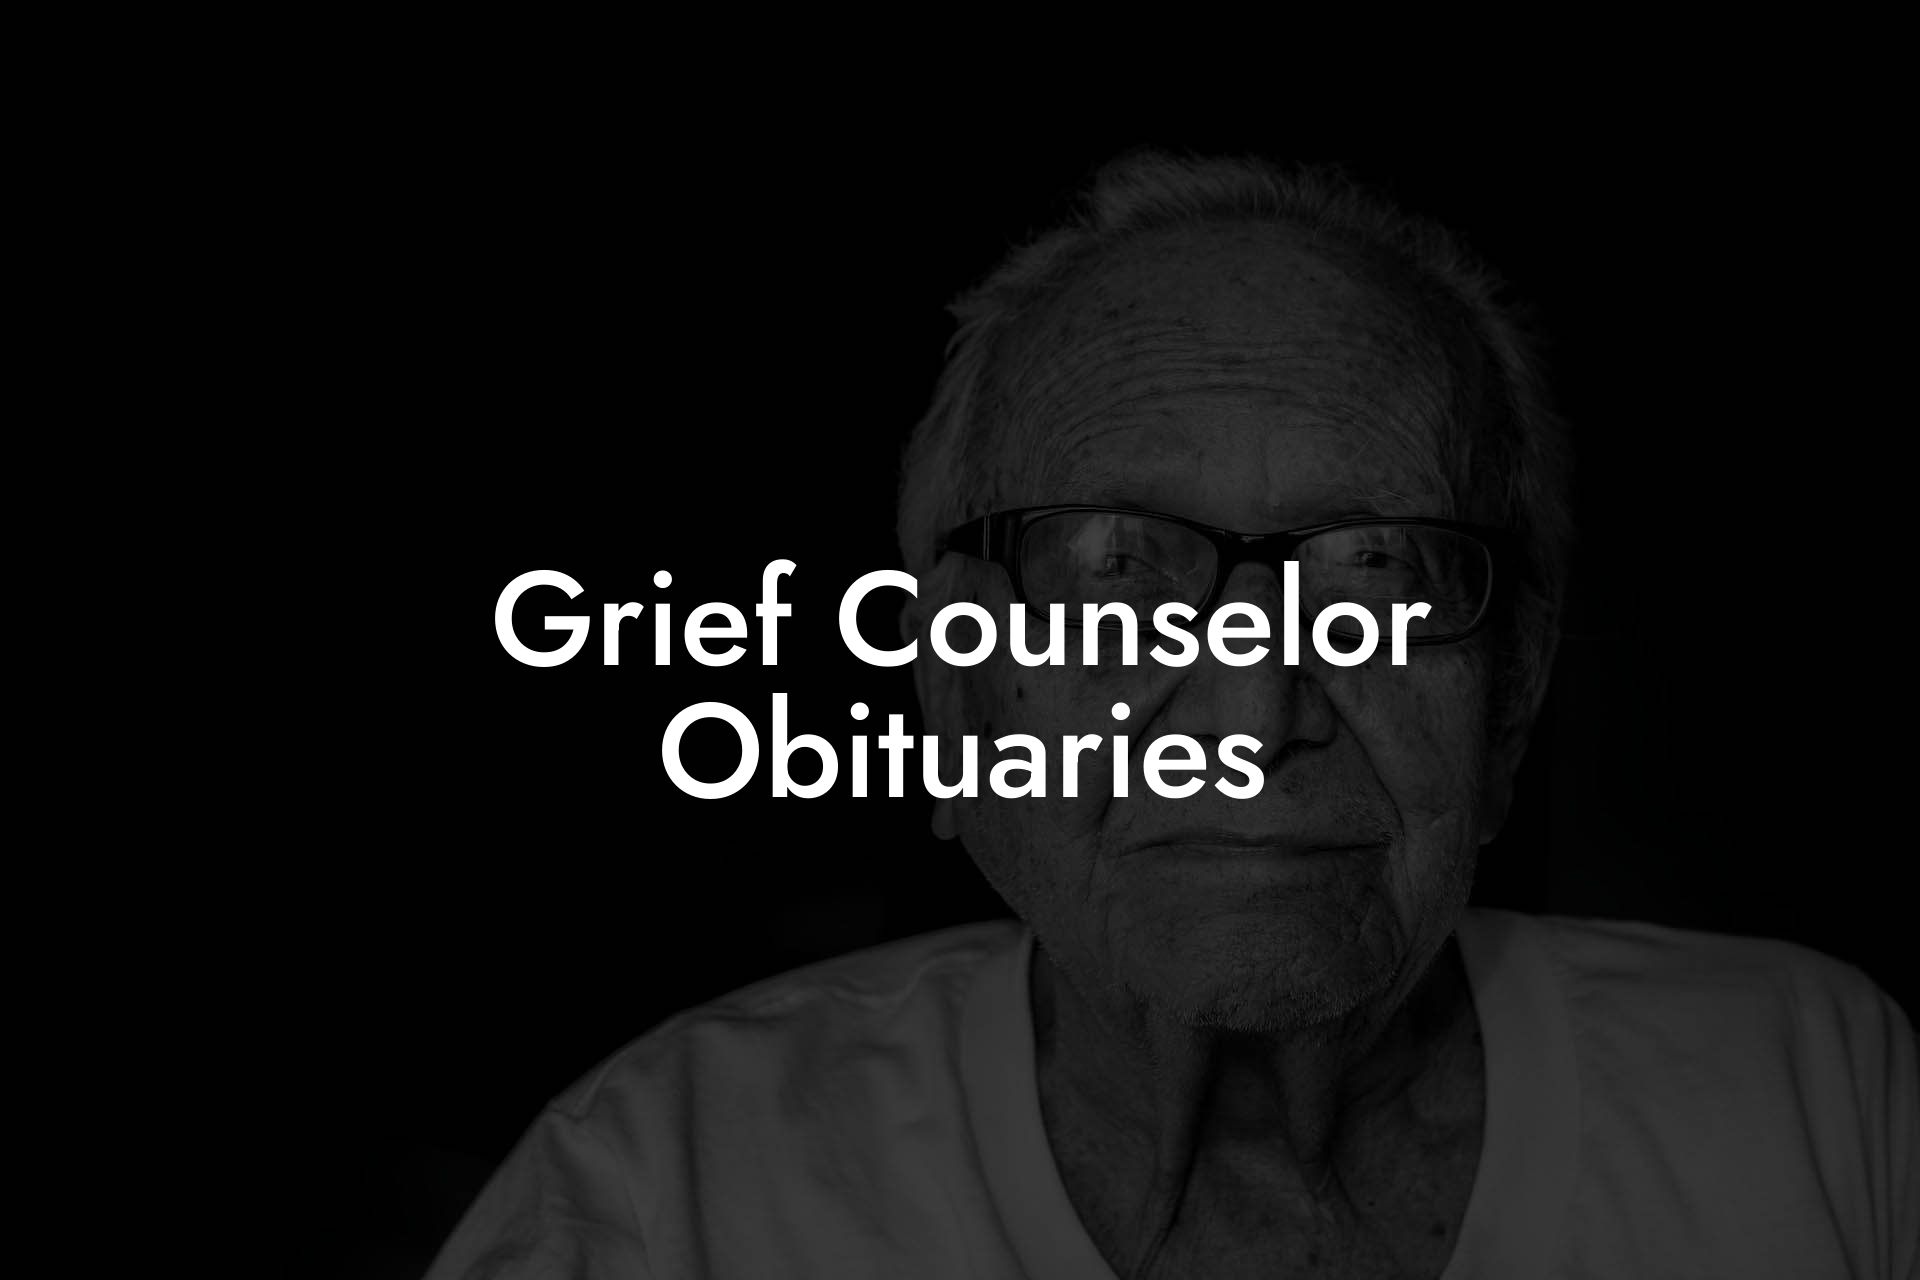 Grief Counselor Obituaries